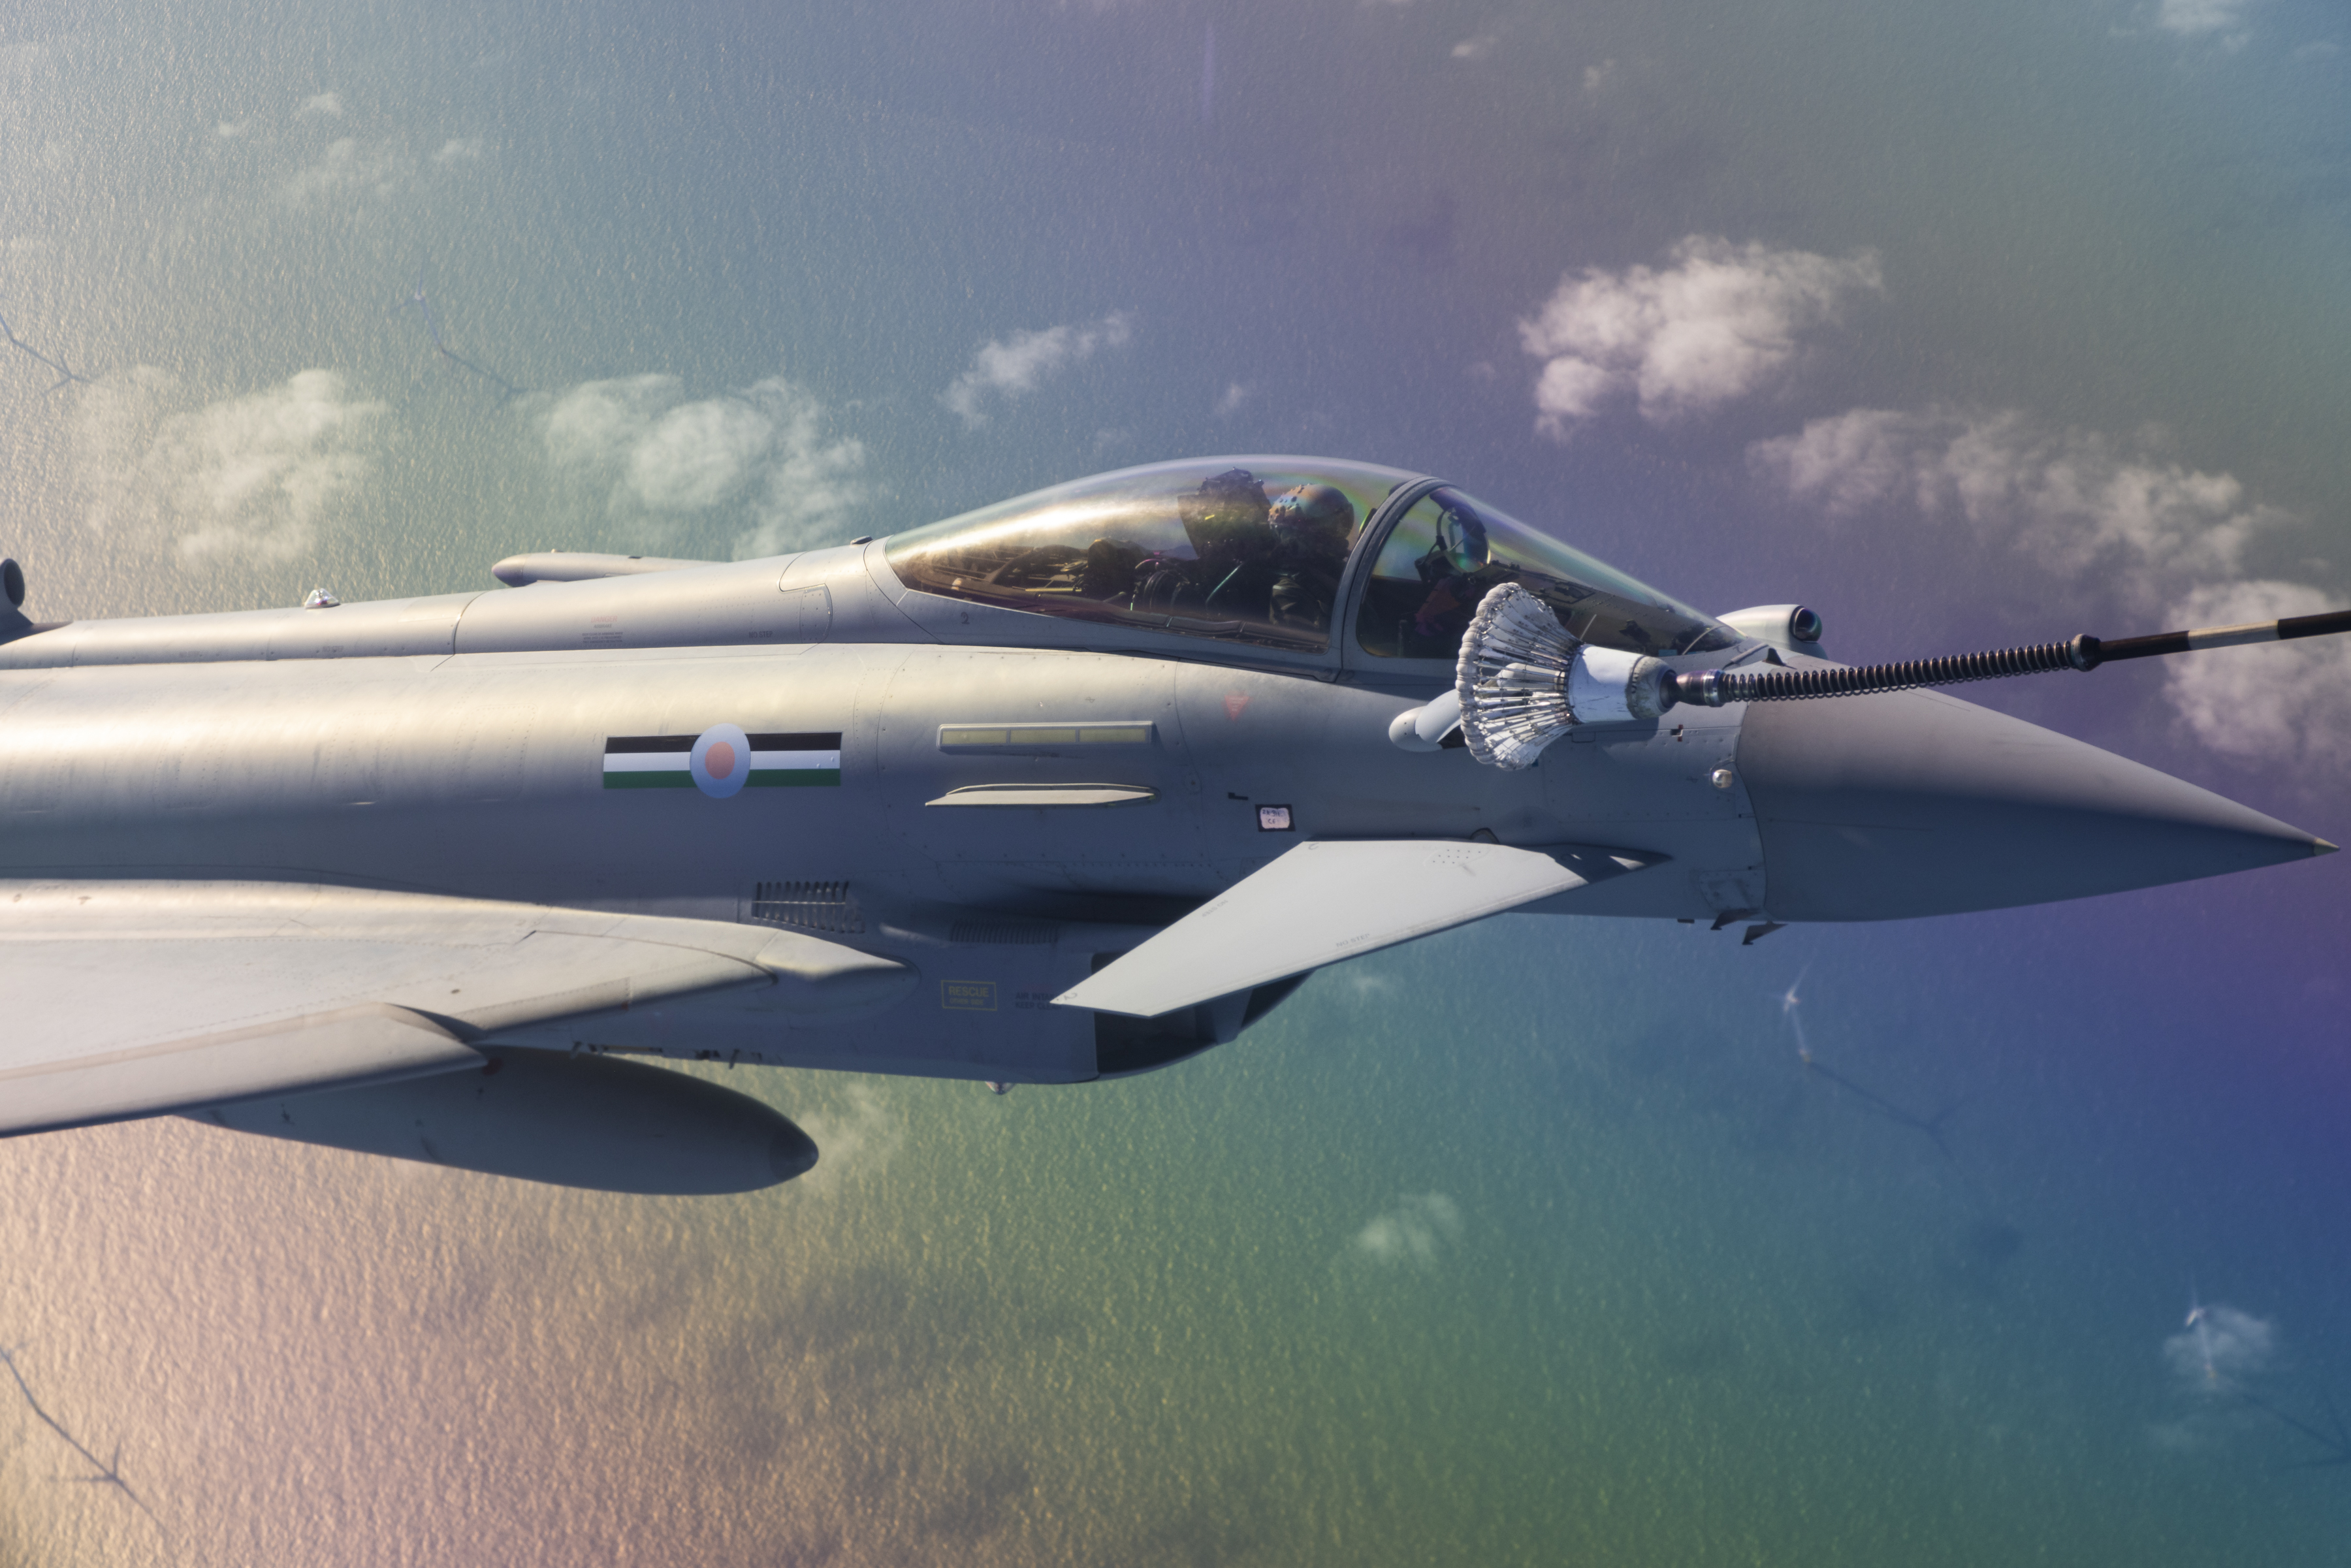 Typhoon taking an air-to-air refuel, ocean background reflecting like a rainbow